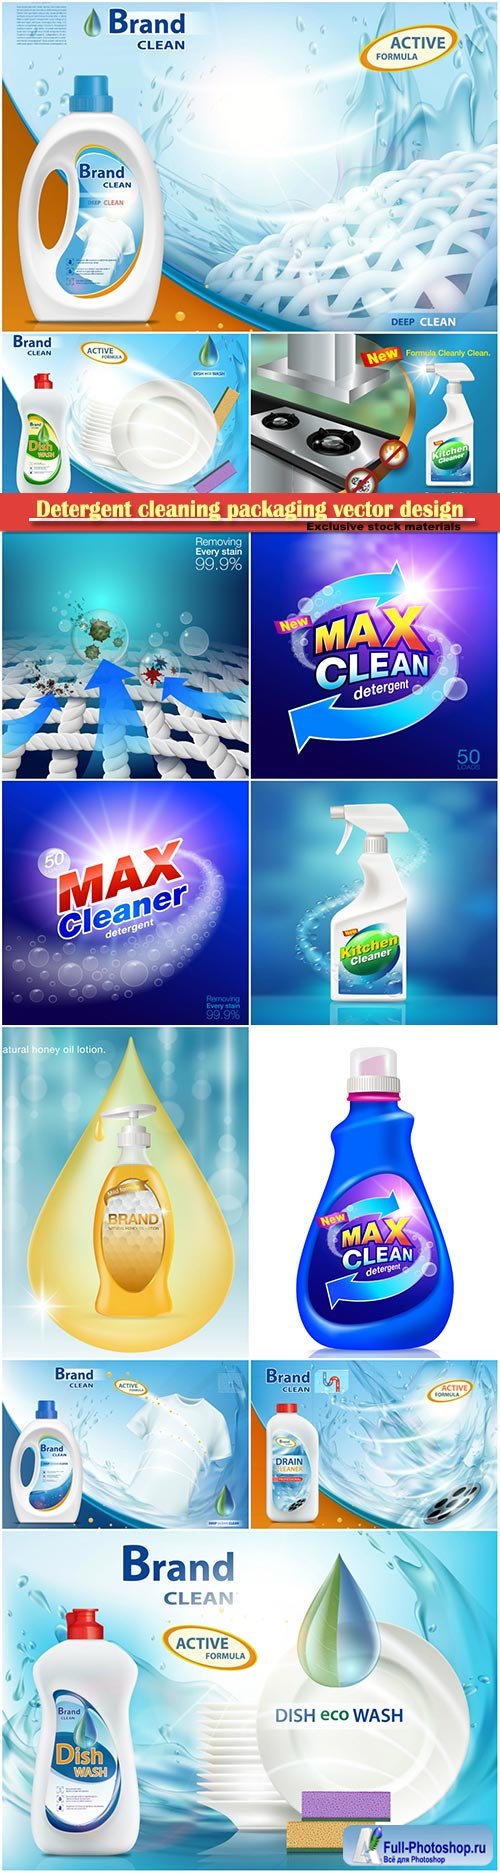 Detergent cleaning packaging vector design